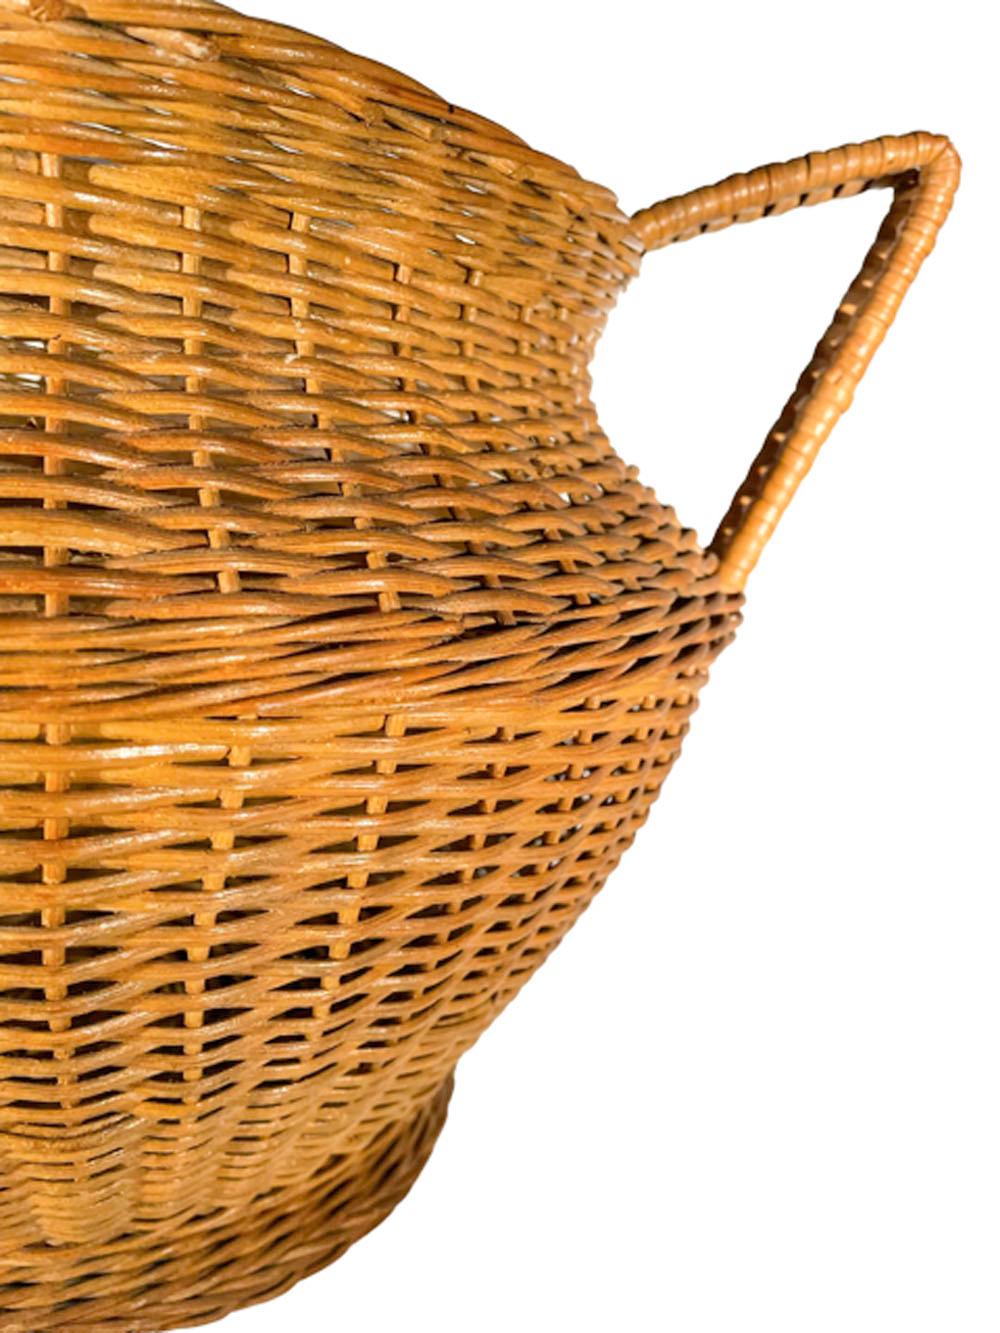 Large Art Deco Wicker Handled Cachepot Retaining Its Haywood-Wakefield Label For Sale 2